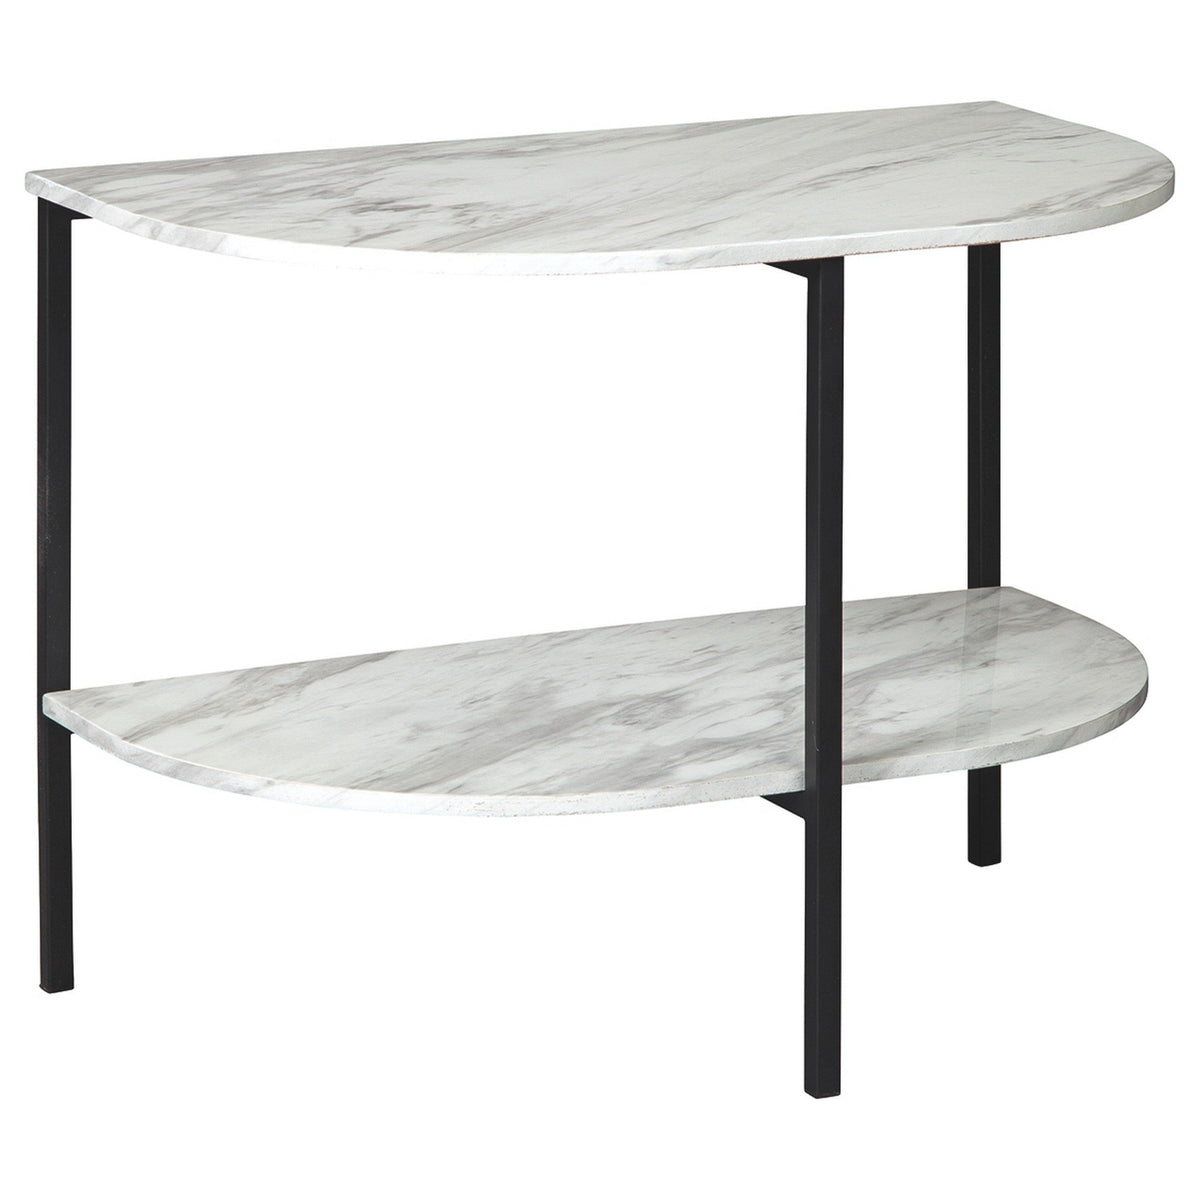 Crescent Moon Shaped Marble Top Metal Chair Side End Table, White and Black - BM226511